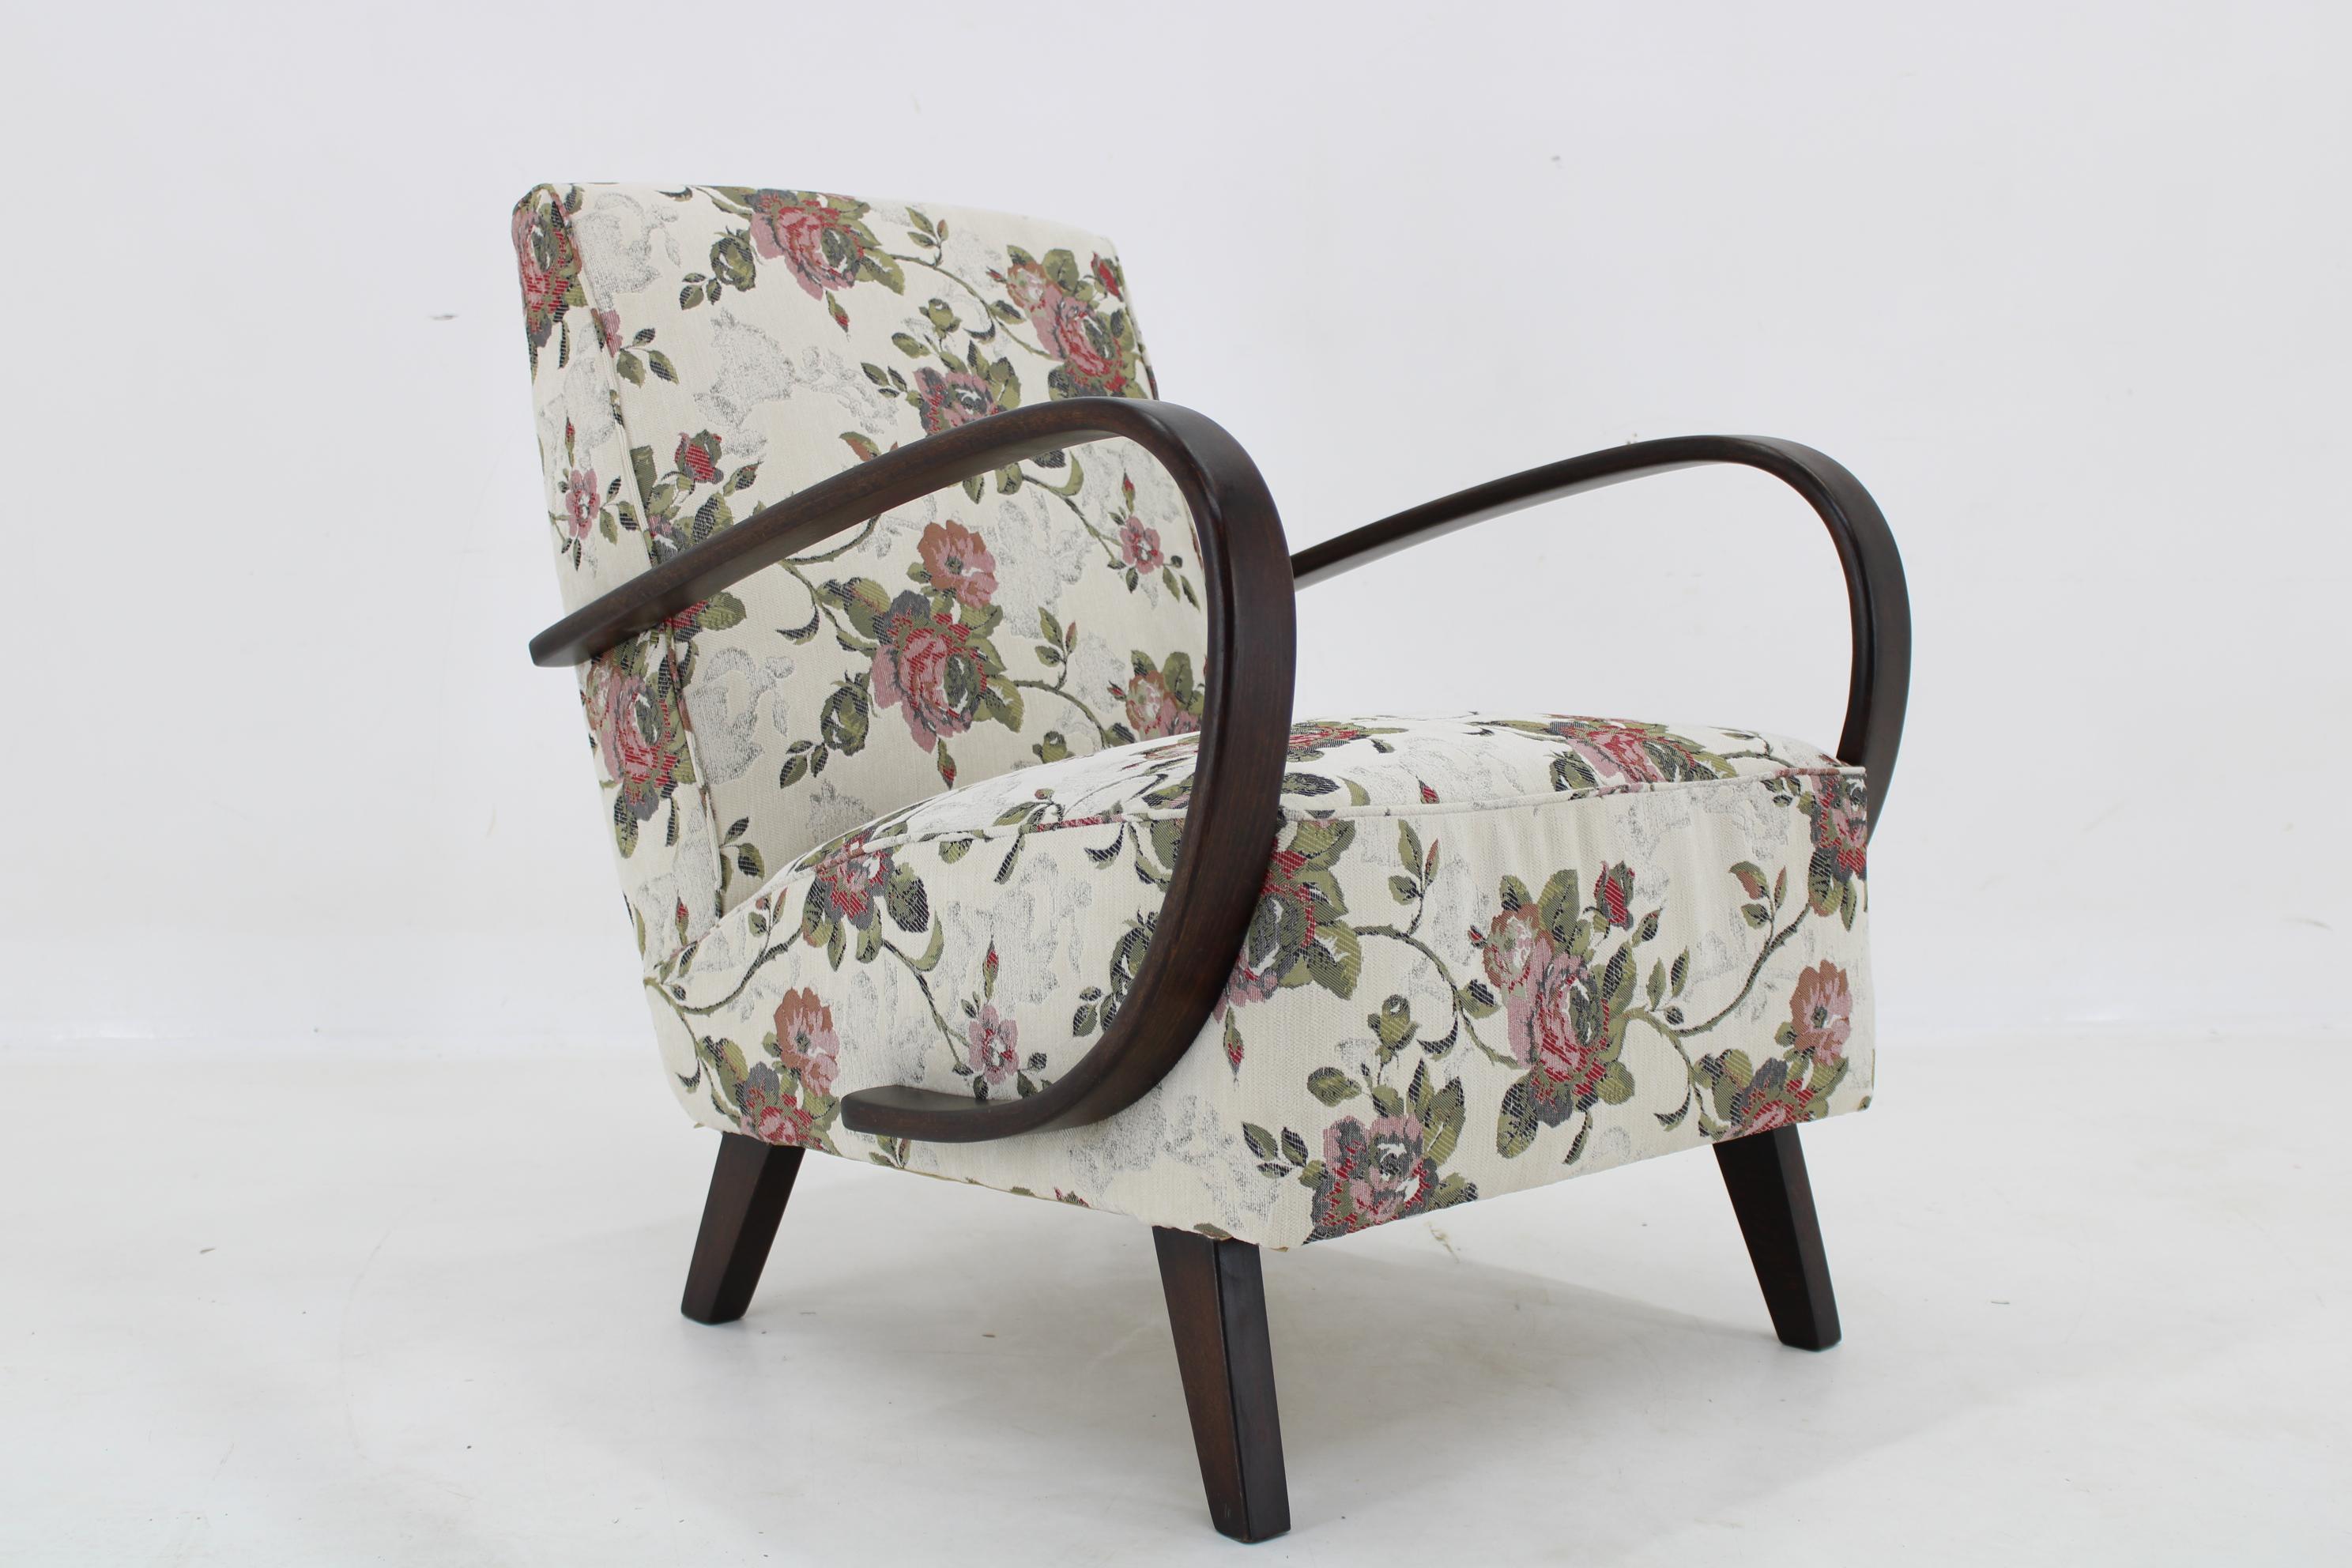 - Newly upholstered
- The wooden parts have been refurbished 
- The seat height is 44cm 